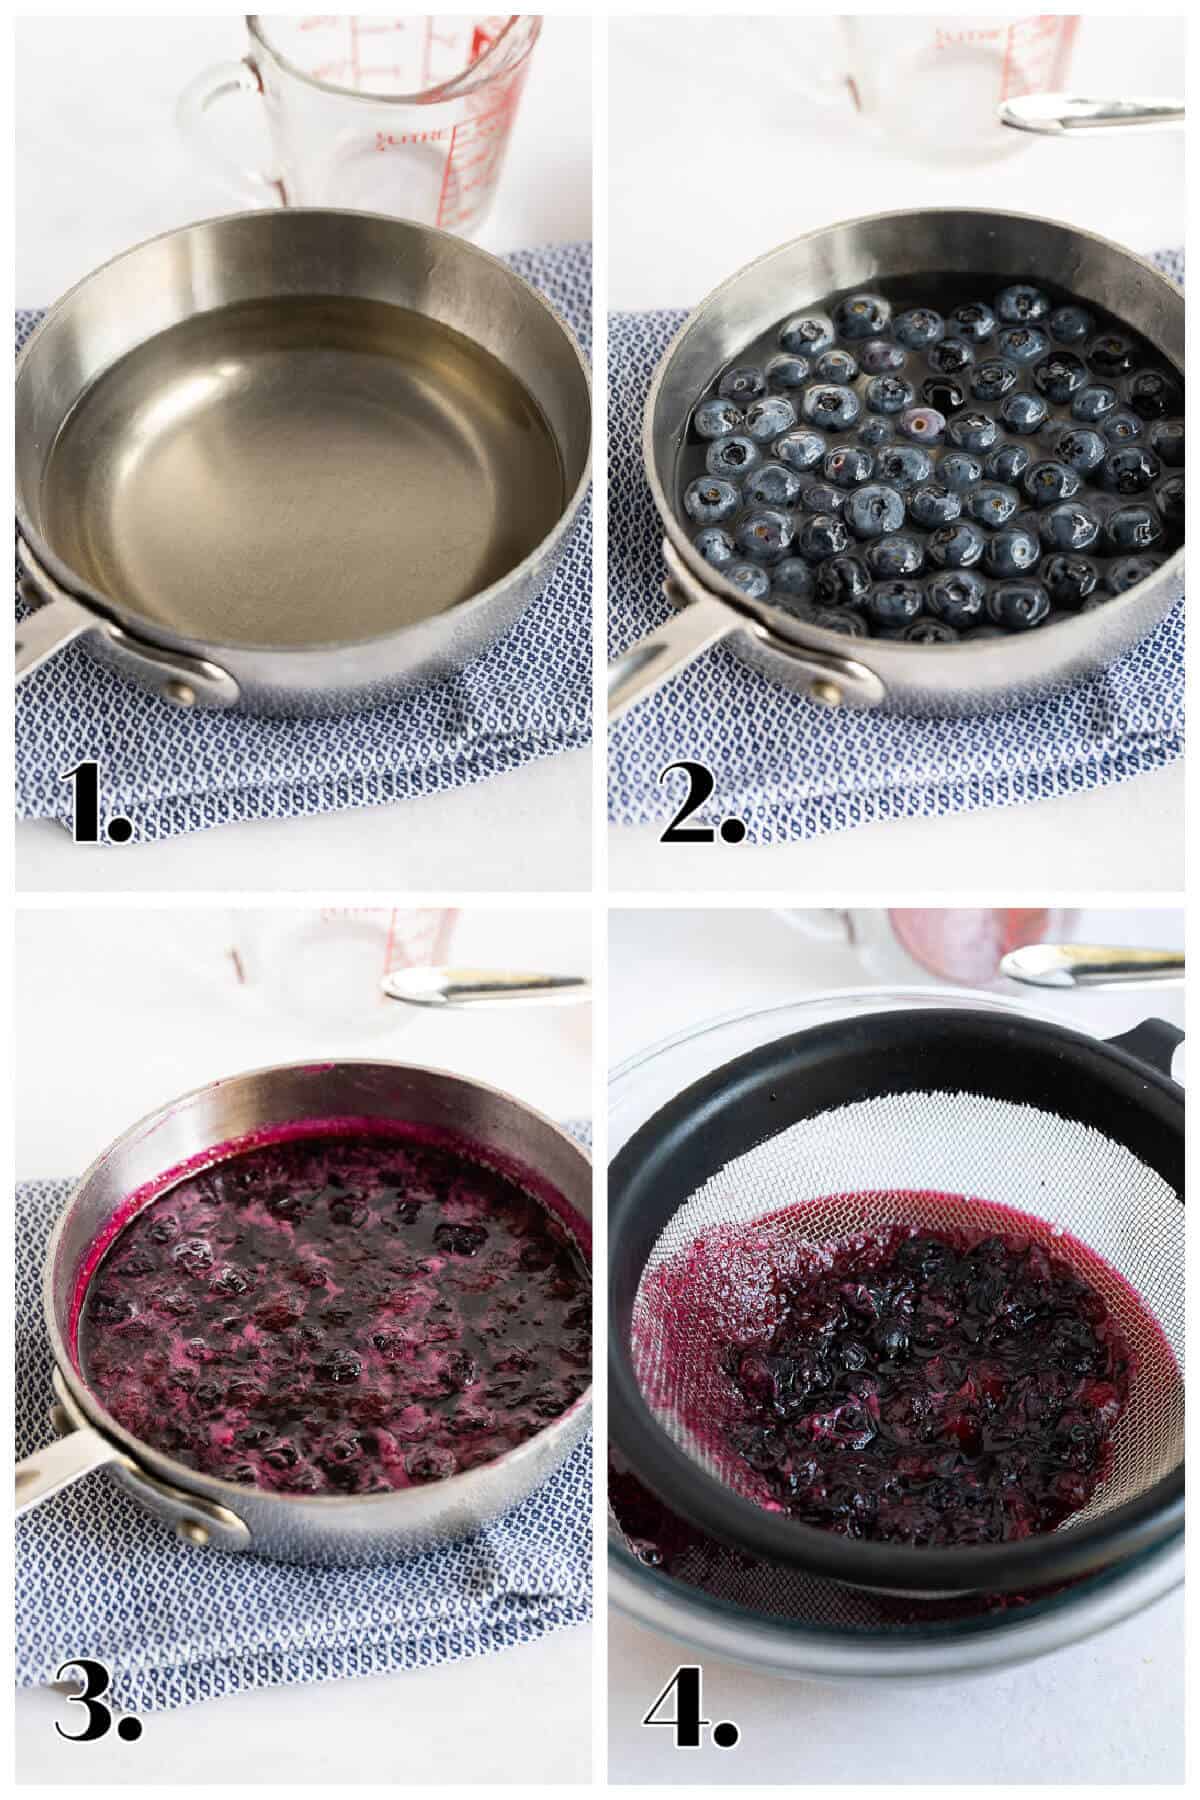 4-image collage showing the steps to make the syrup. 1. sugar melted in water in saucepan; 2. blueberries added; 3. blueberries simmering; 4. blueberries in a fine mesh strainer.